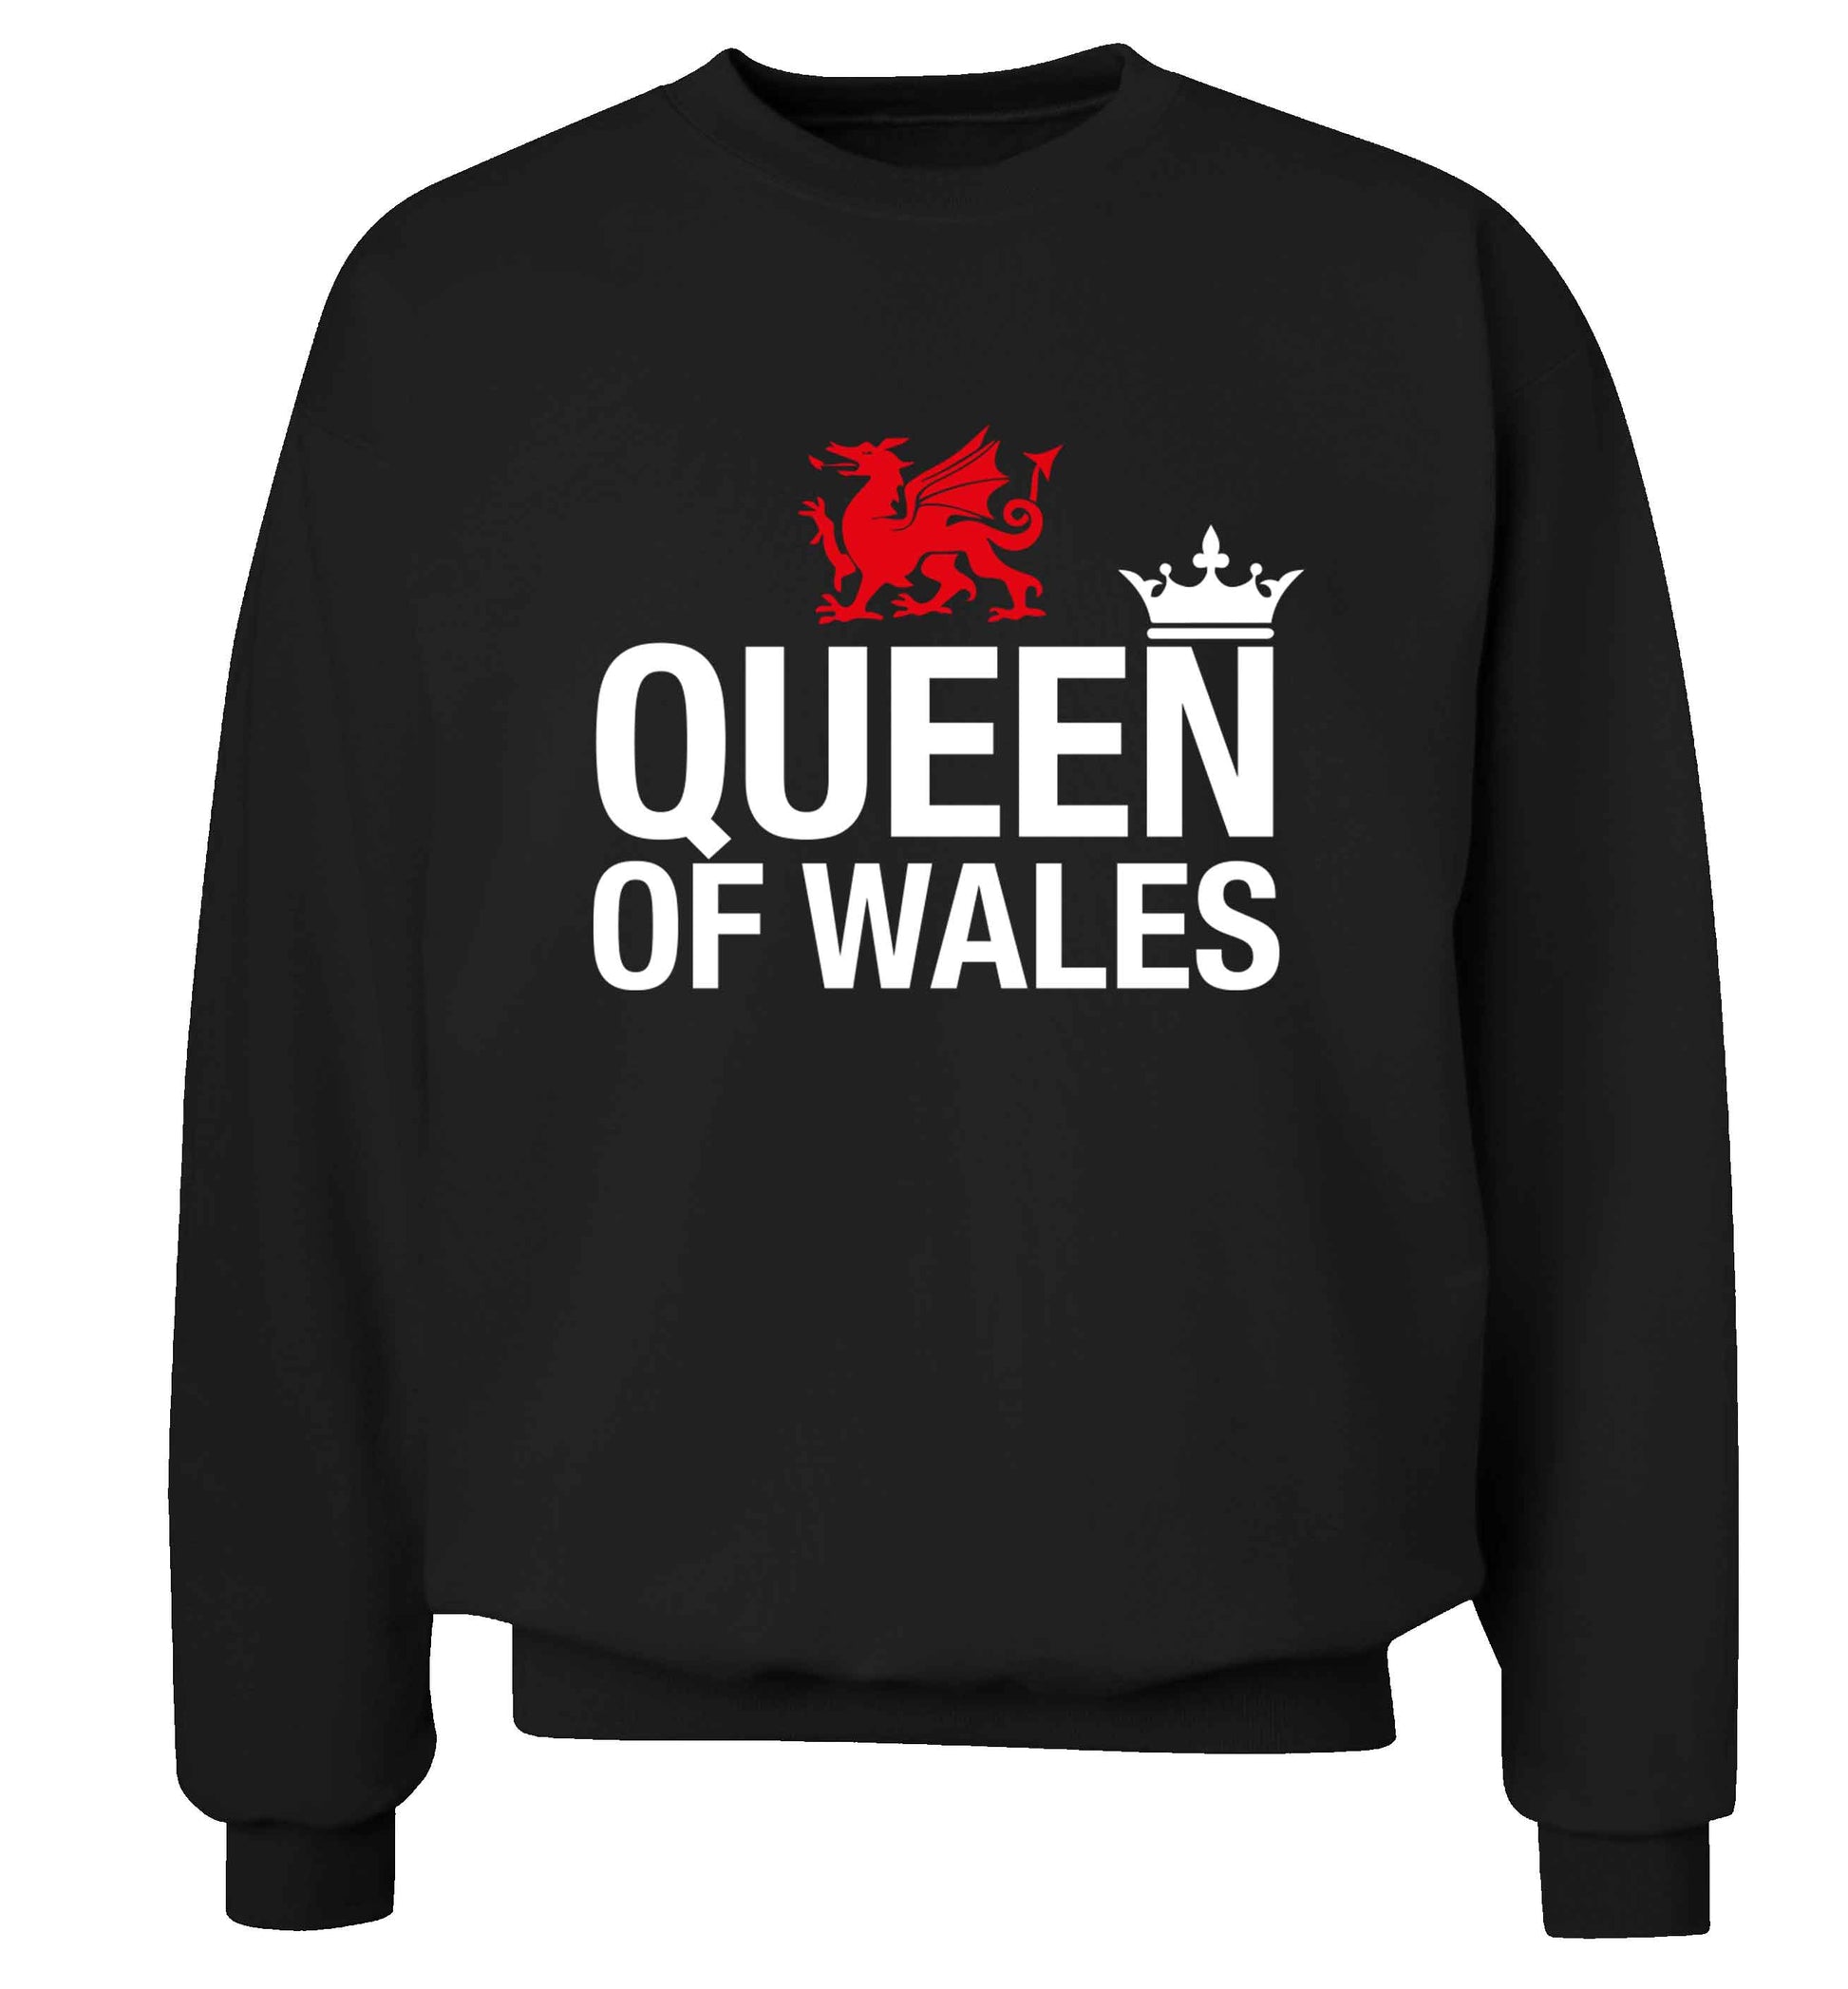 Queen of Wales Adult's unisex black Sweater 2XL